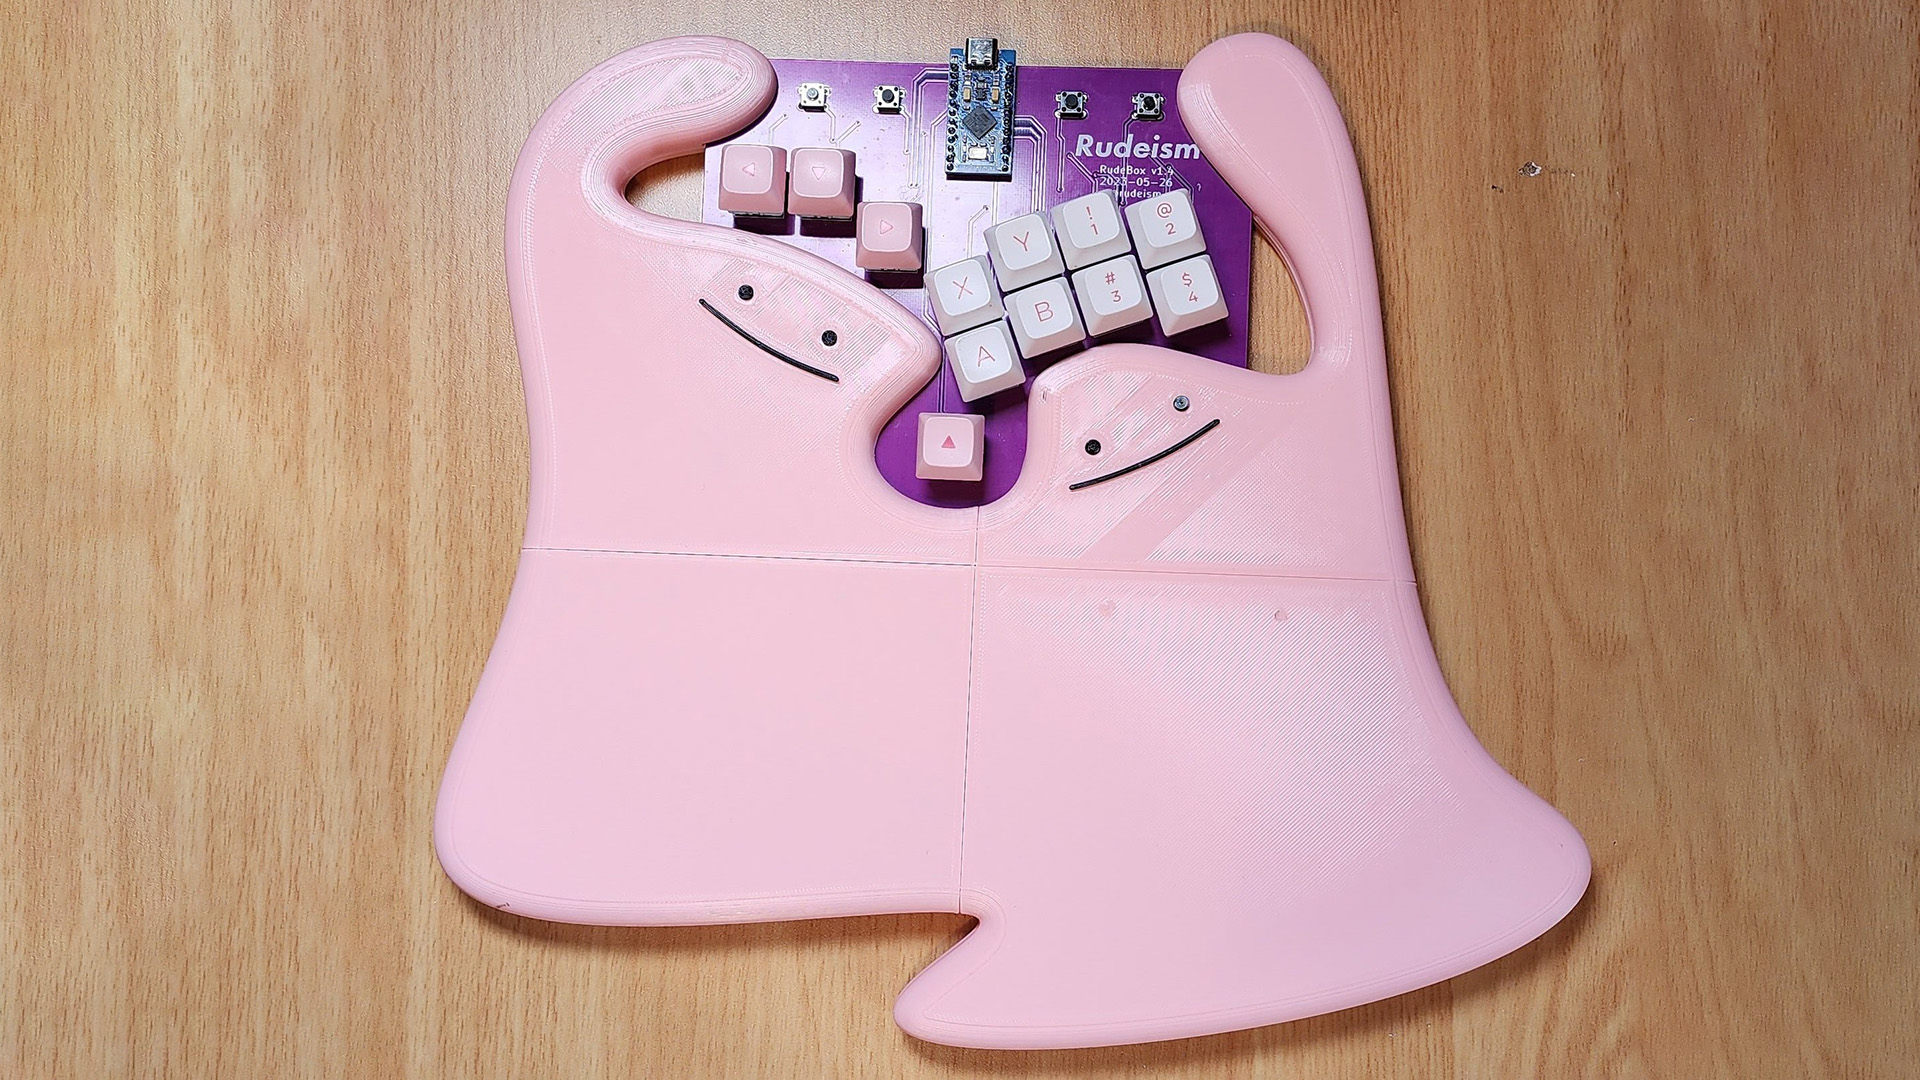 Rudeism's Rudebox custom fighting pad on a desk with wrist rest depicting two dittos